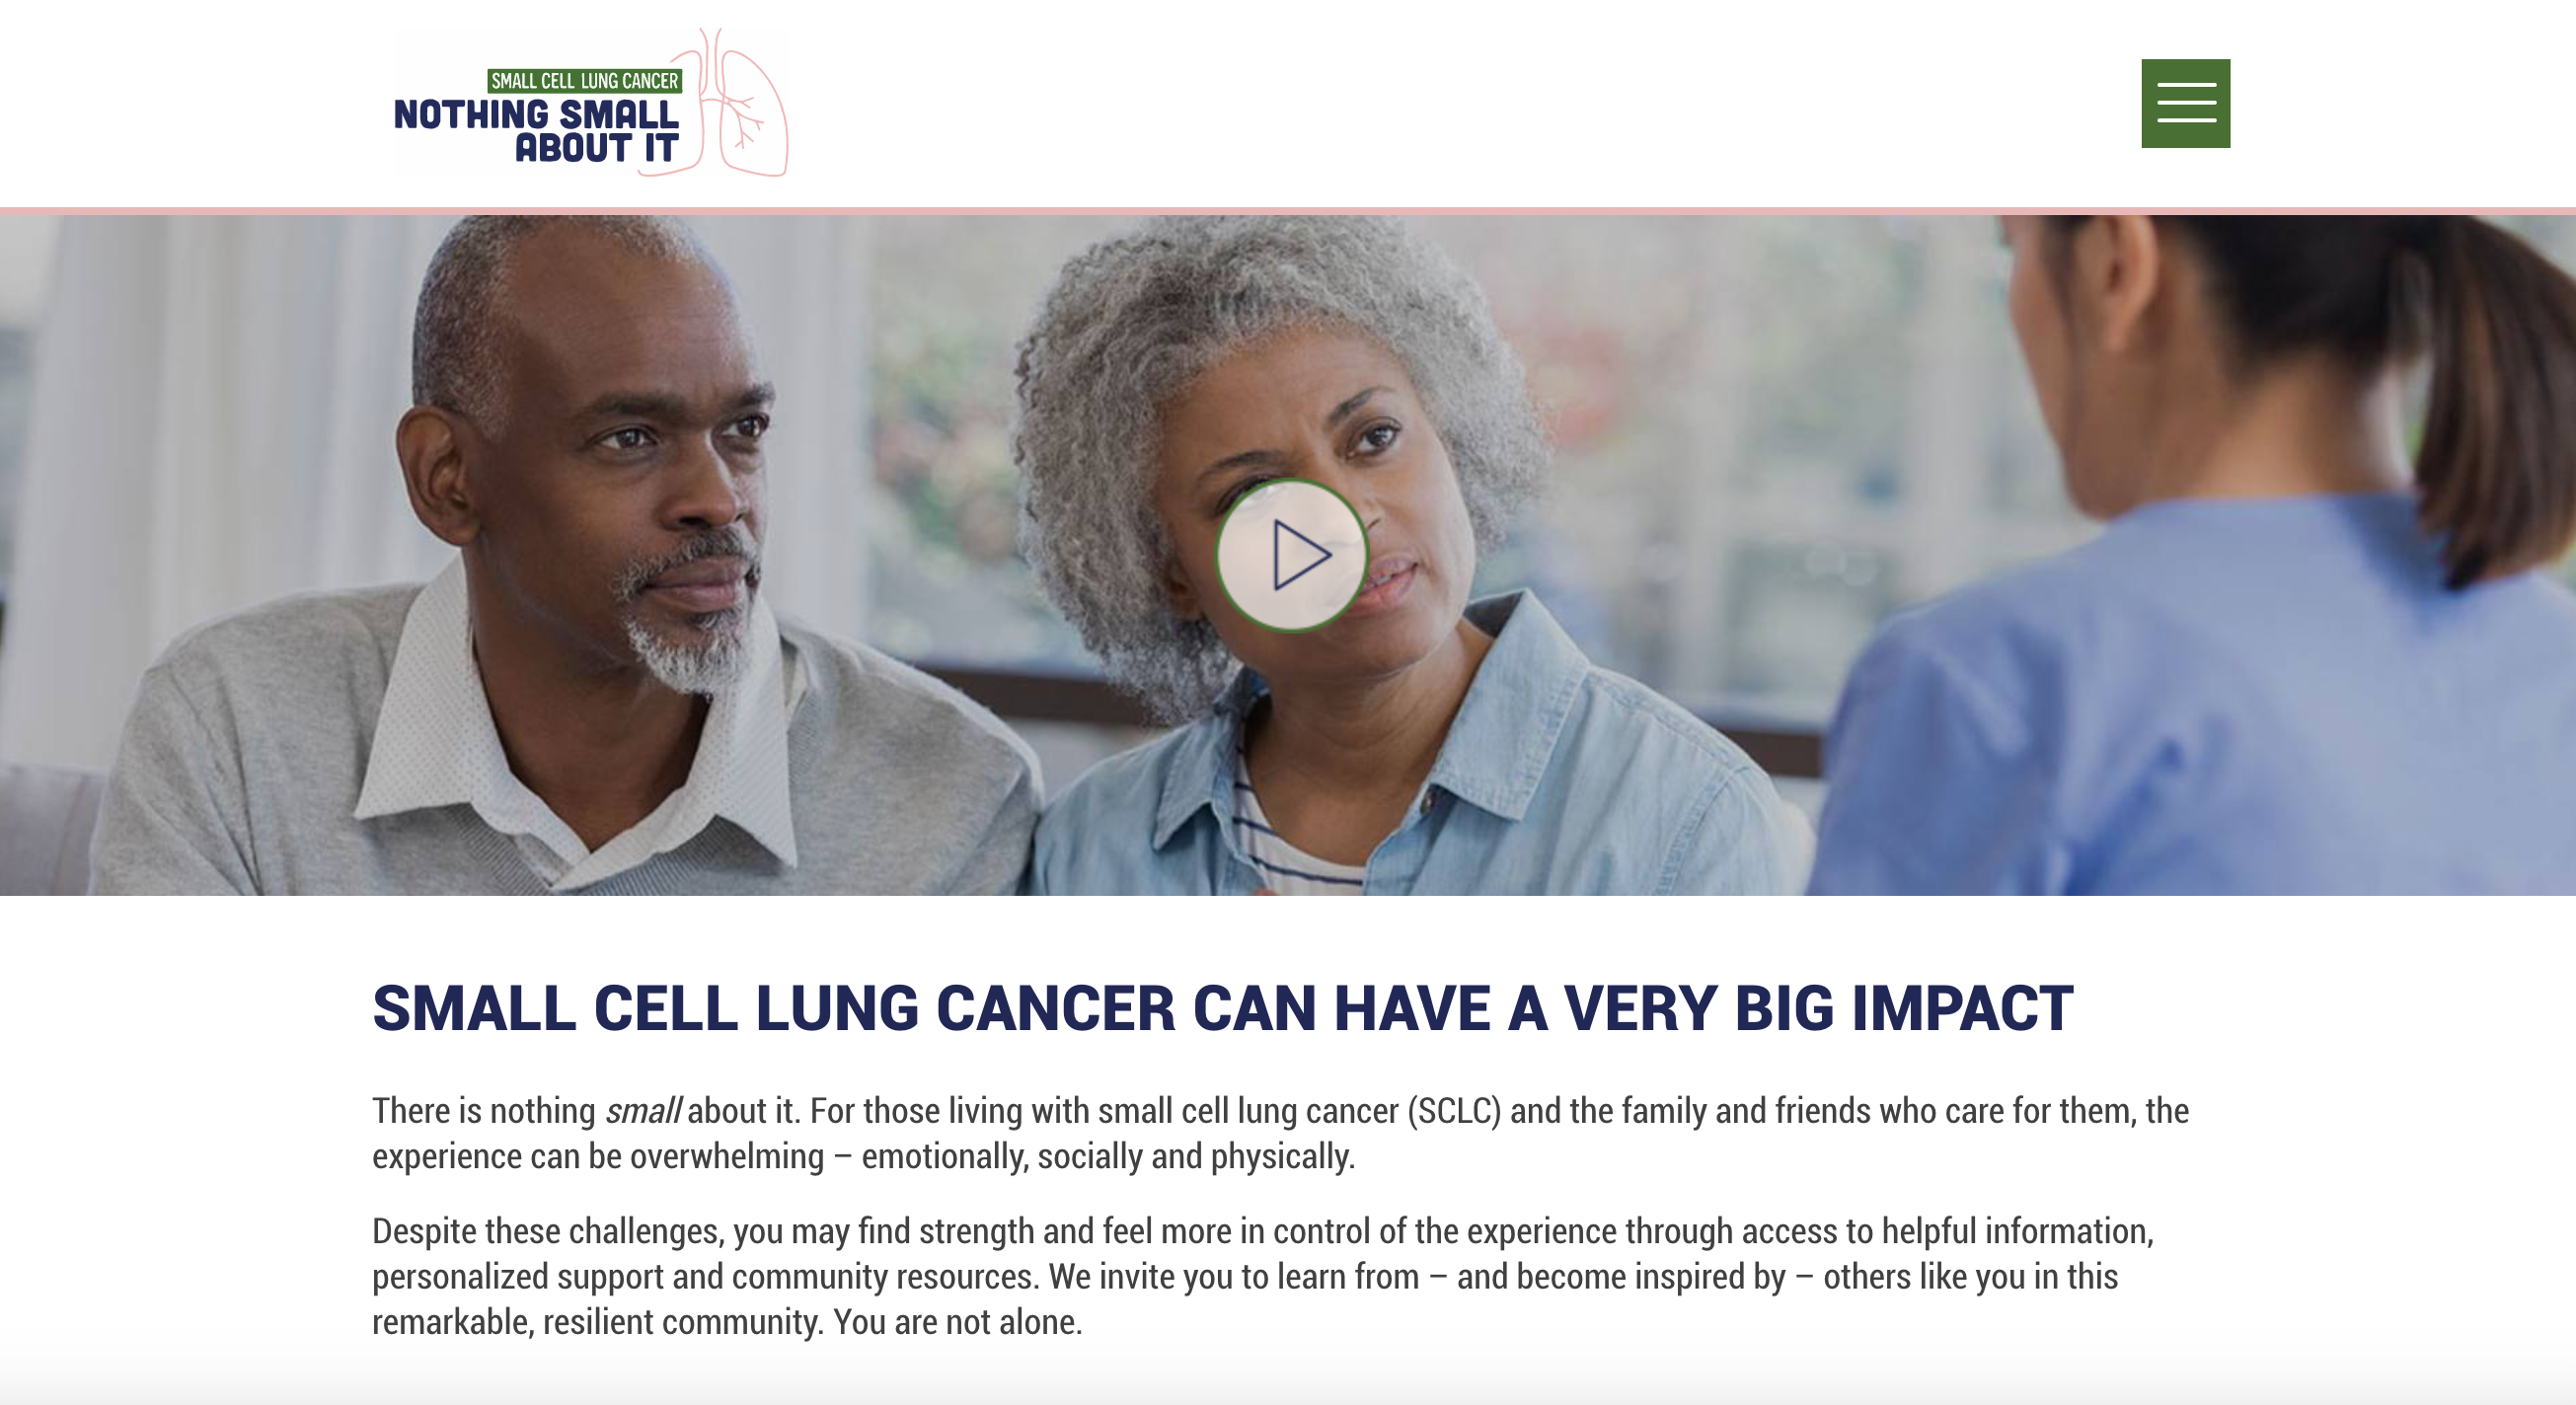 New Digital Tool Provides Resources for Patients With Small Cell Lung Cancer and Their Caregivers